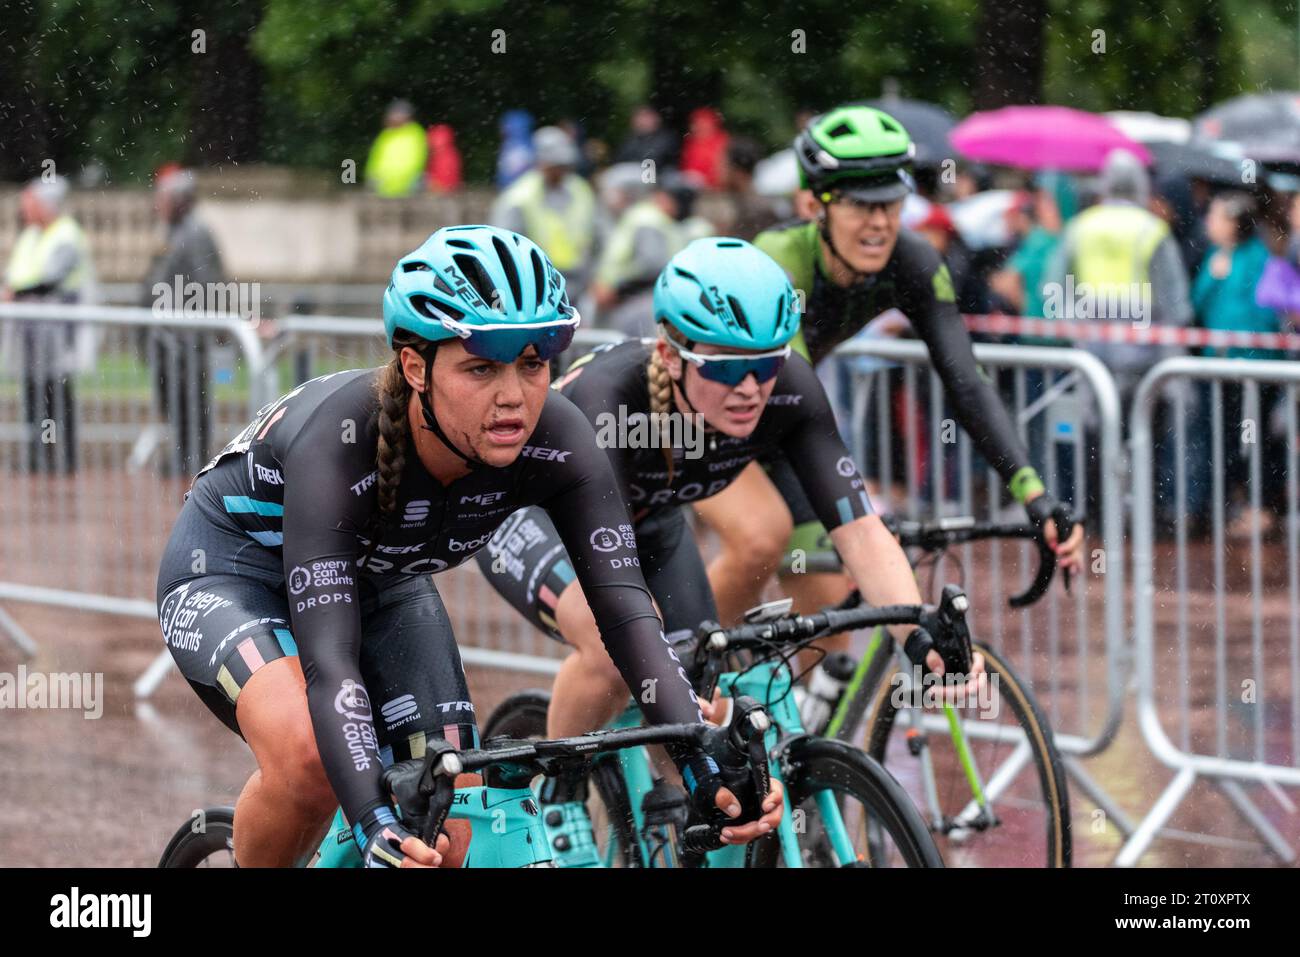 Abby-Mae Parkinson of team Drops racing in the RideLondon Classique UCI World Tour women's professional cycle race in Westminster, London, UK. Muddy Stock Photo